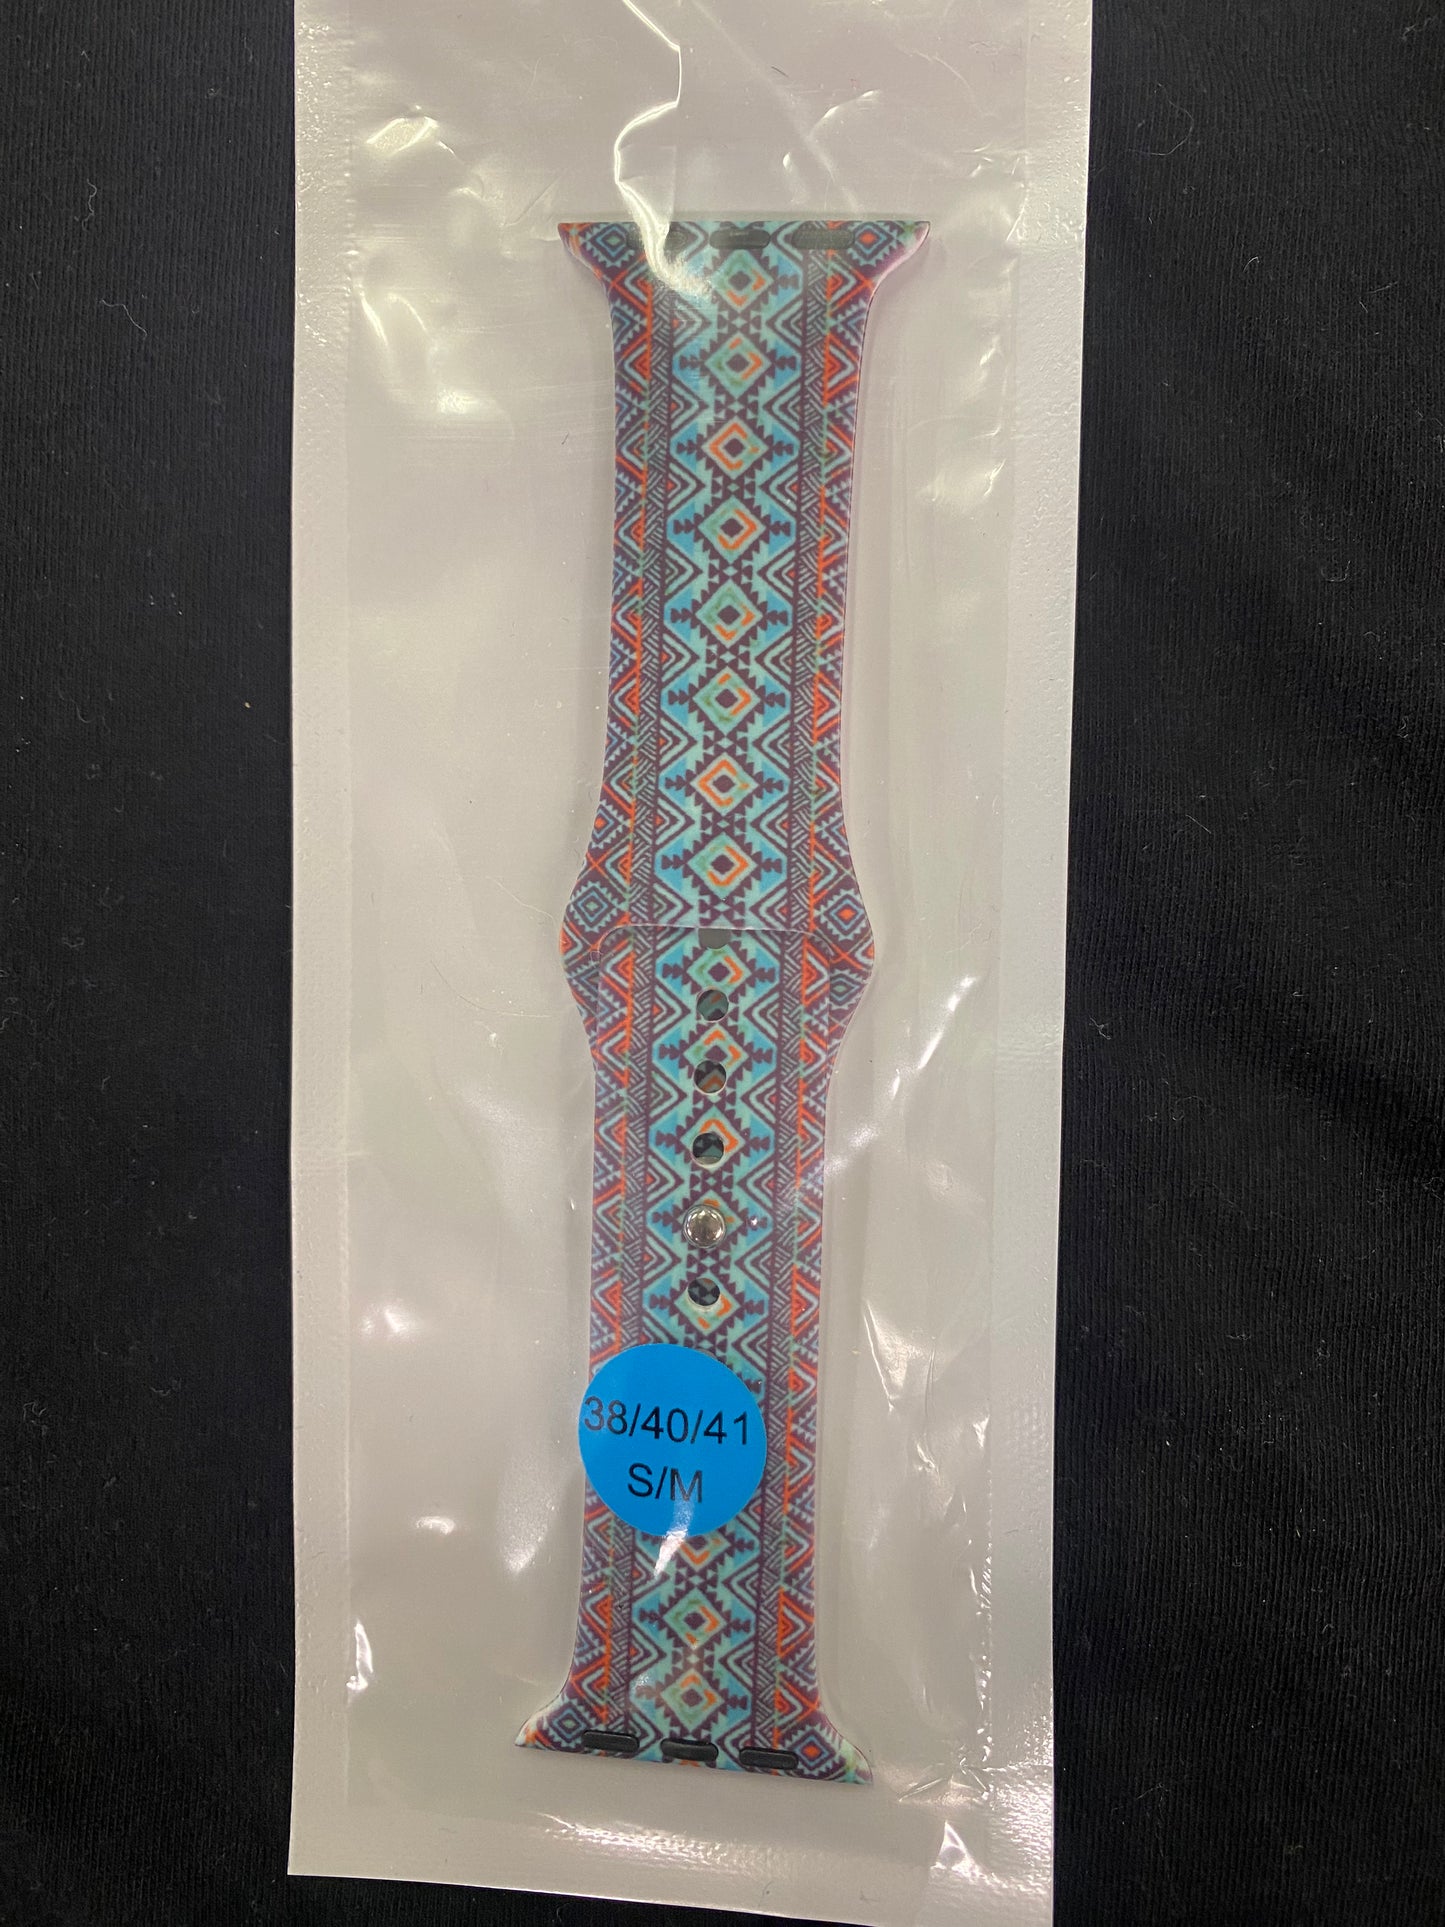 Western and Fun Apple Watch bands